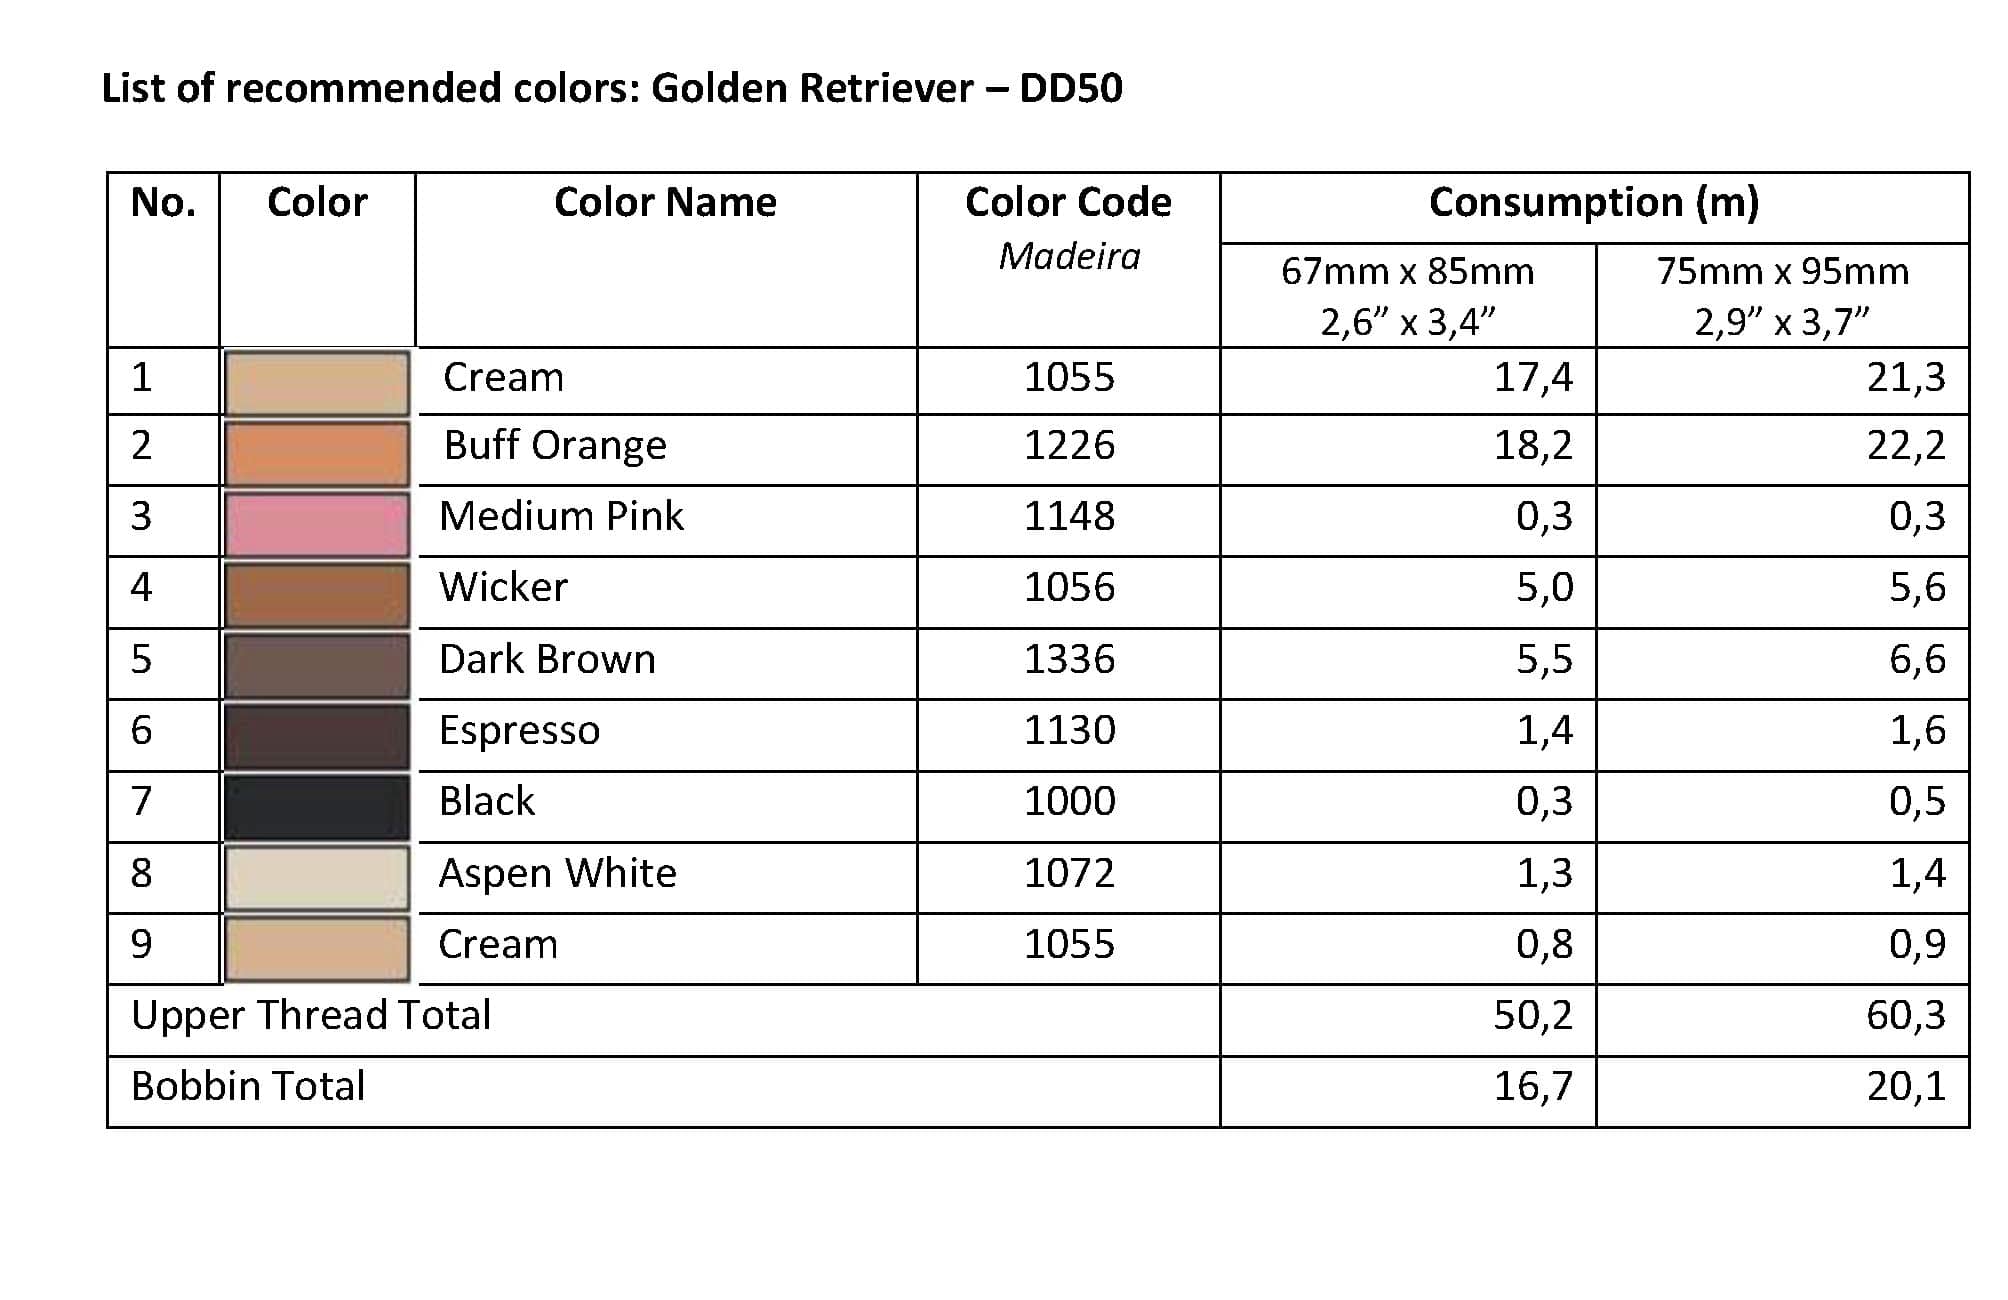 List of Recommended Colors - Golden Retriever DD50